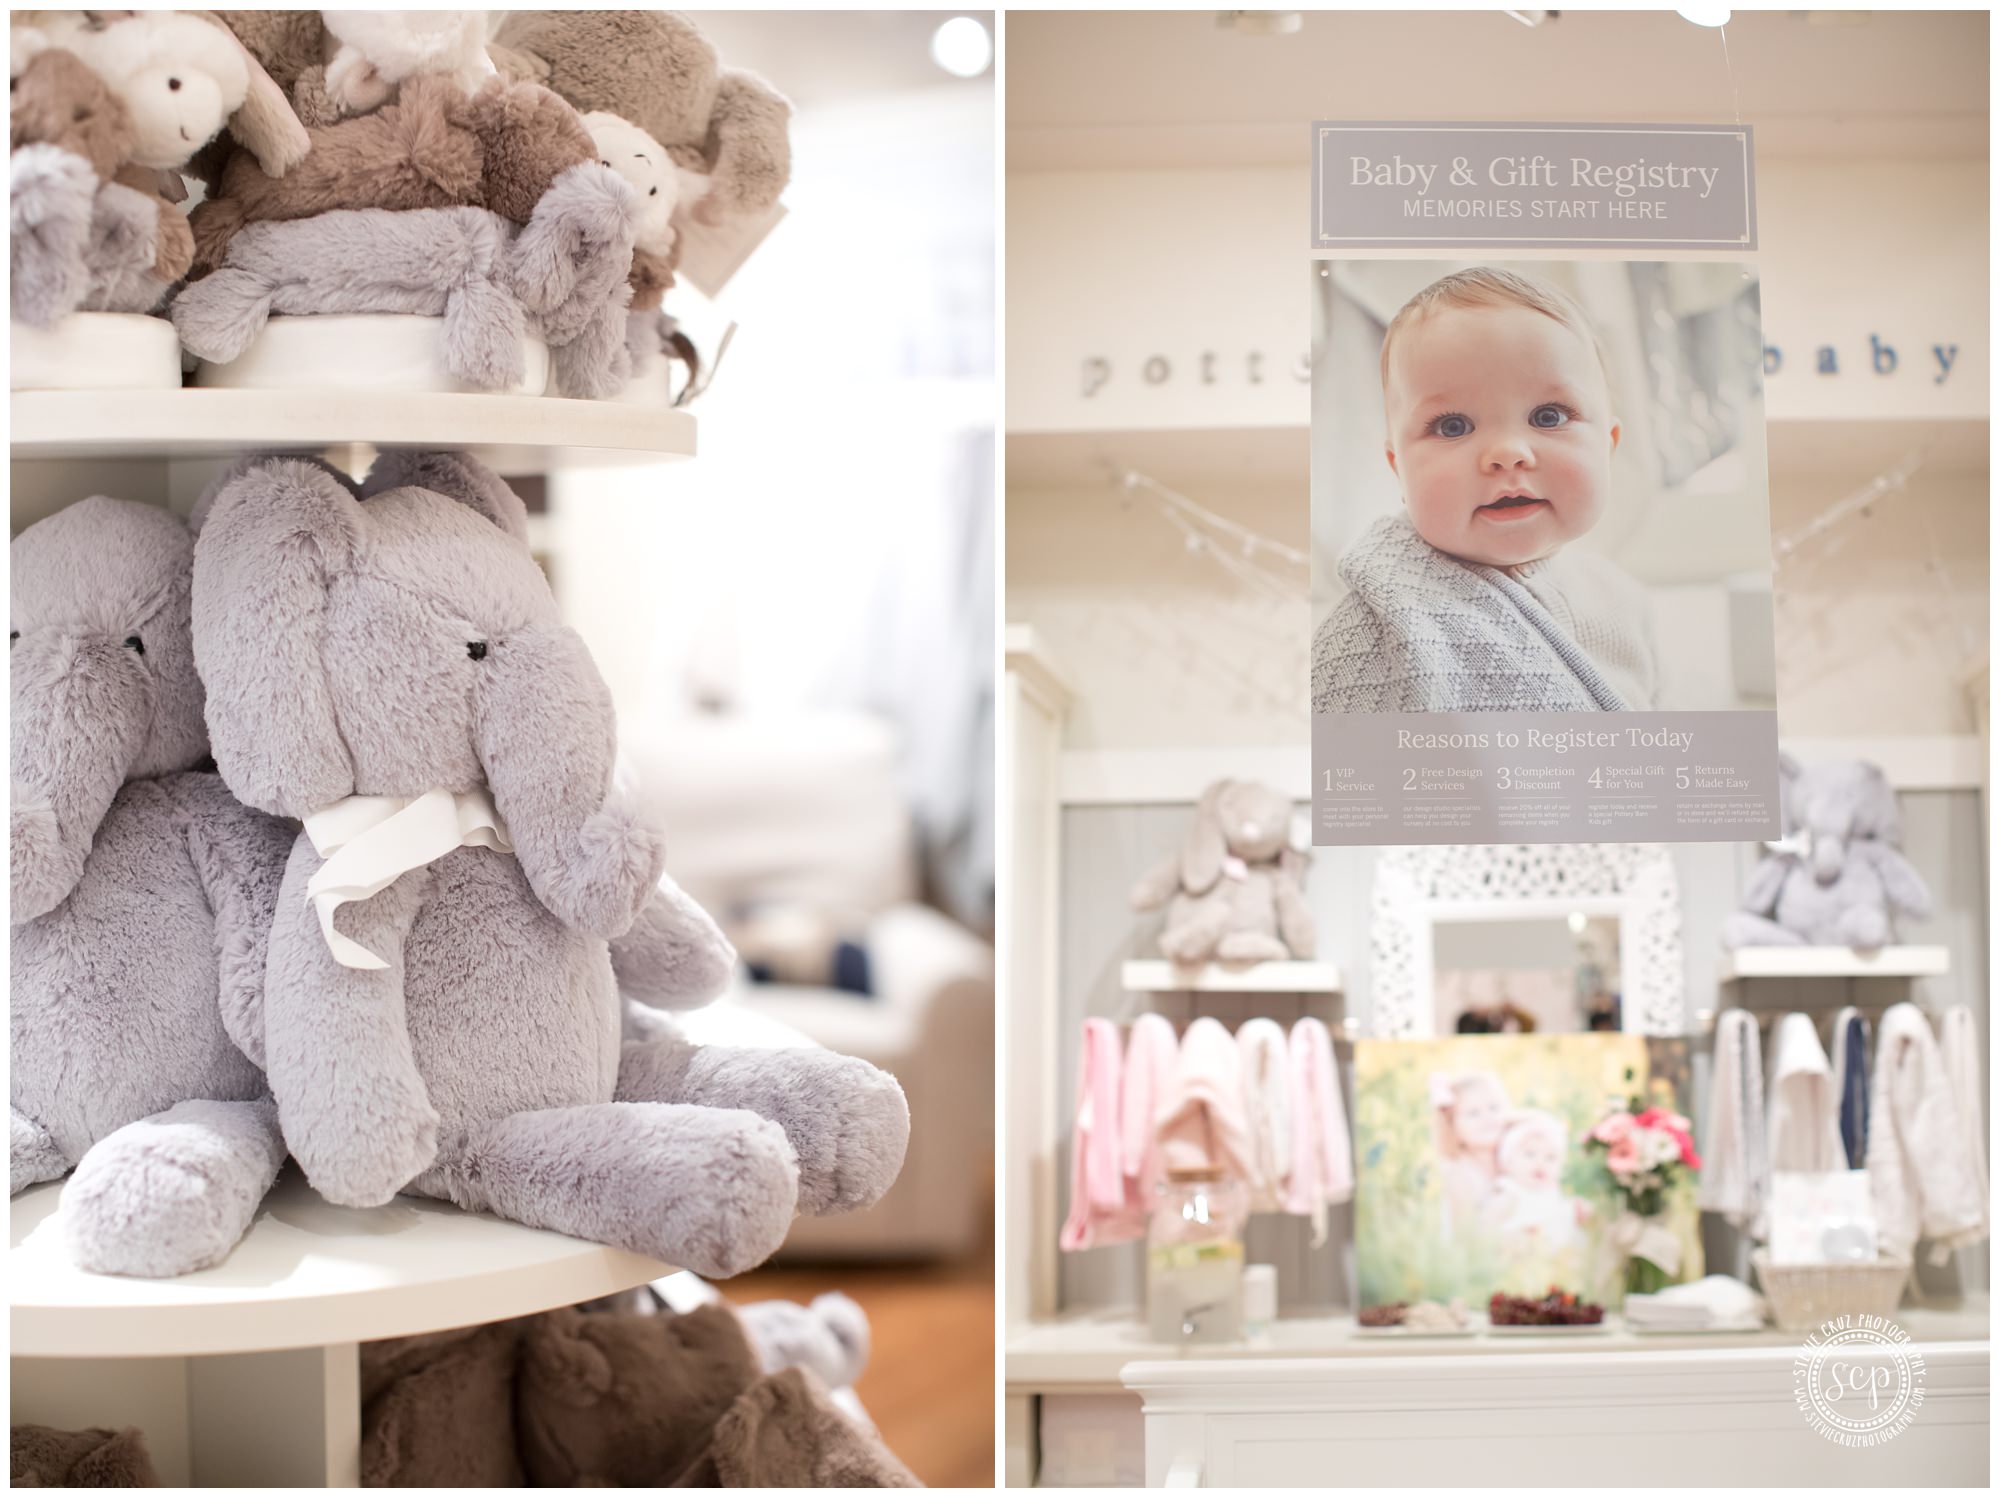 Pottery Barn Kids is a great place to register for baby gifts 